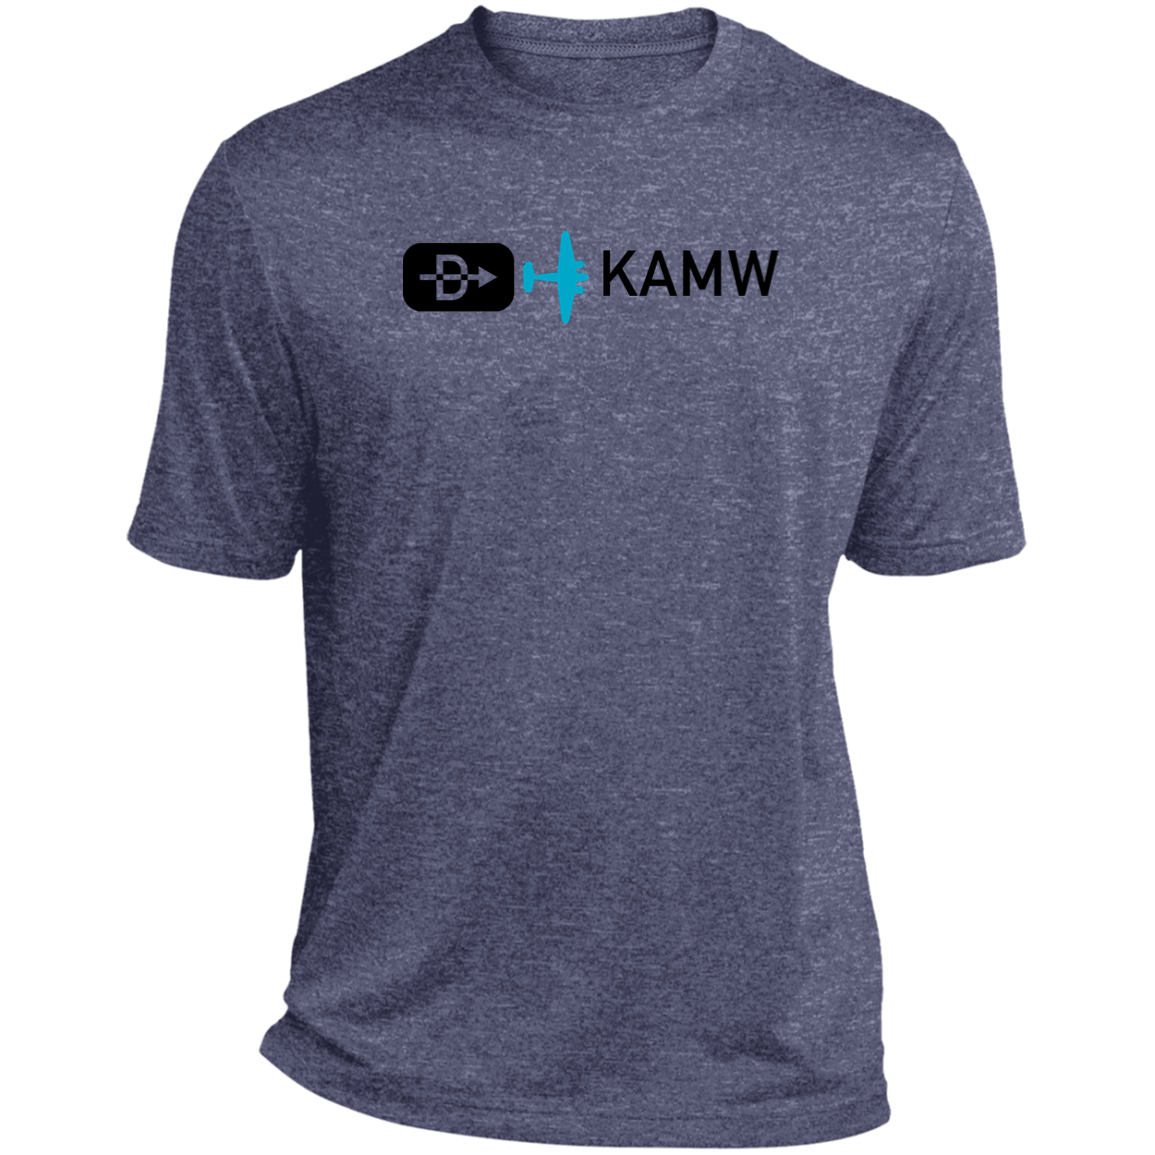 Direct to KAMW, BLK Beech 18. ST360 Heather Performance Tee